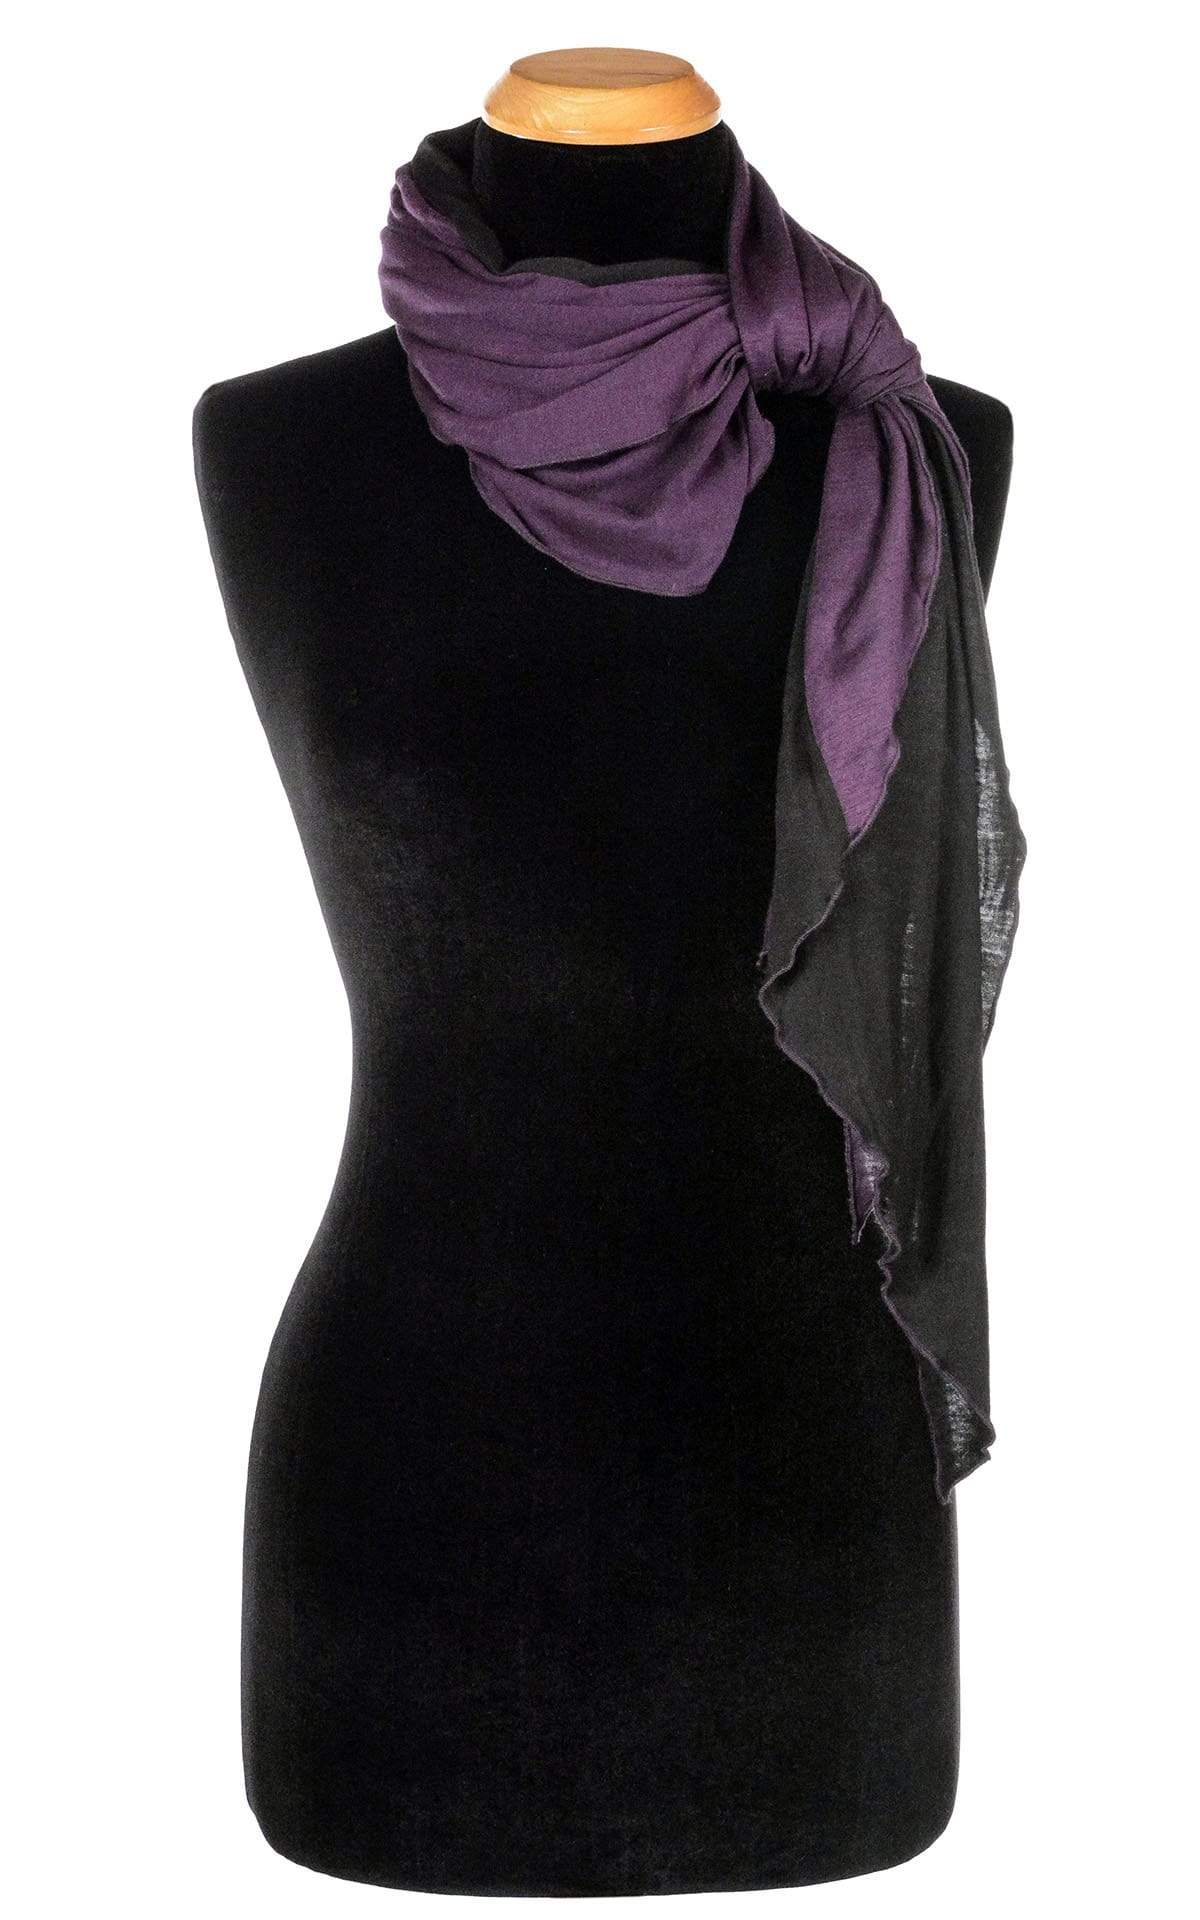 Ladies Large Handkerchief Scarf, Wrap jersey knit fabric on a mannequin tied in front | Abyss W/ Purple Haze, black and  Plum | Handmade in Seattle WA | Pandemonium Millinery